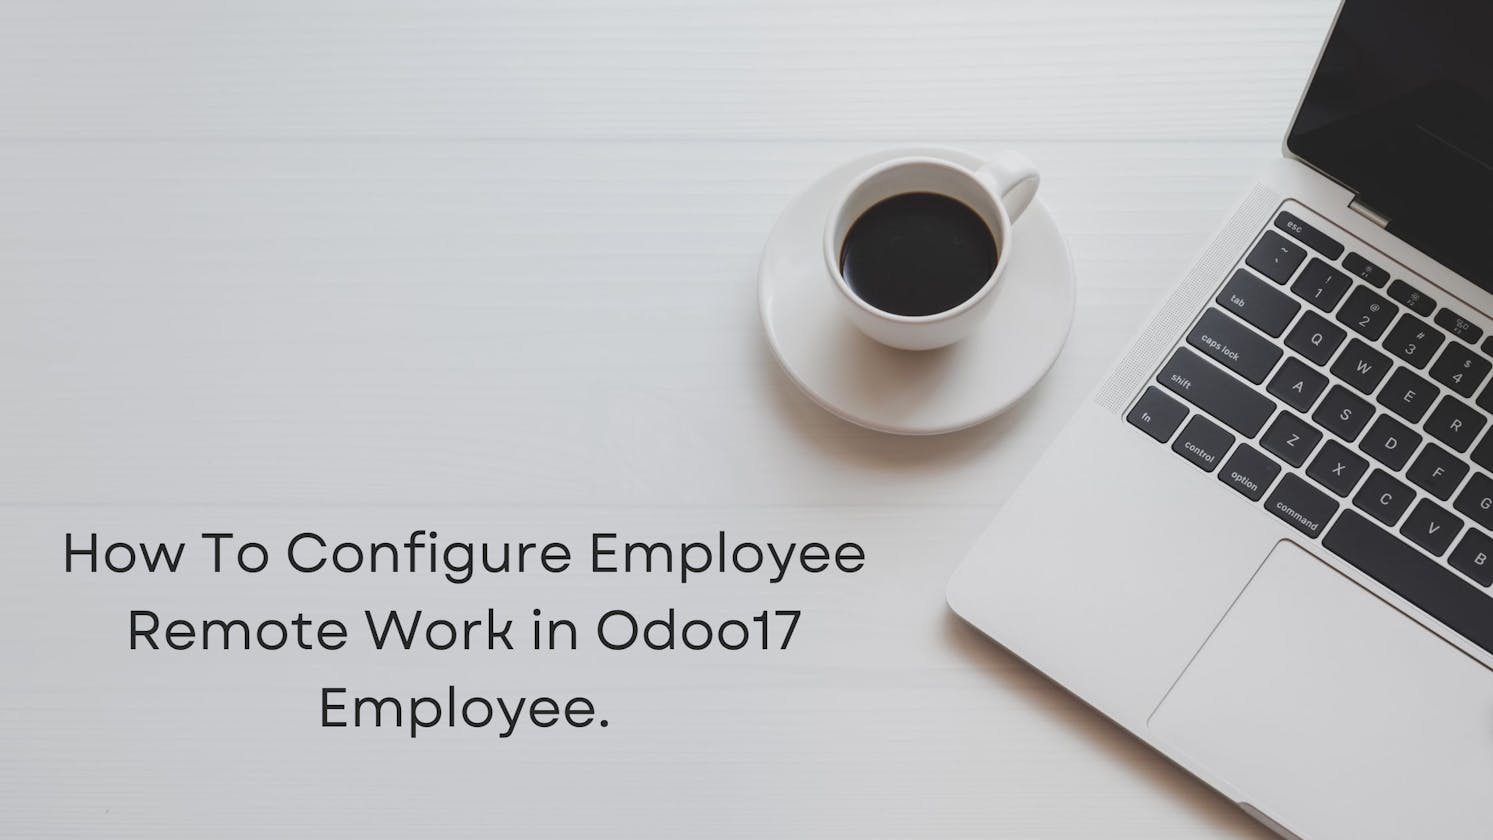 How To Configure Employee Remote Work in Odoo17.